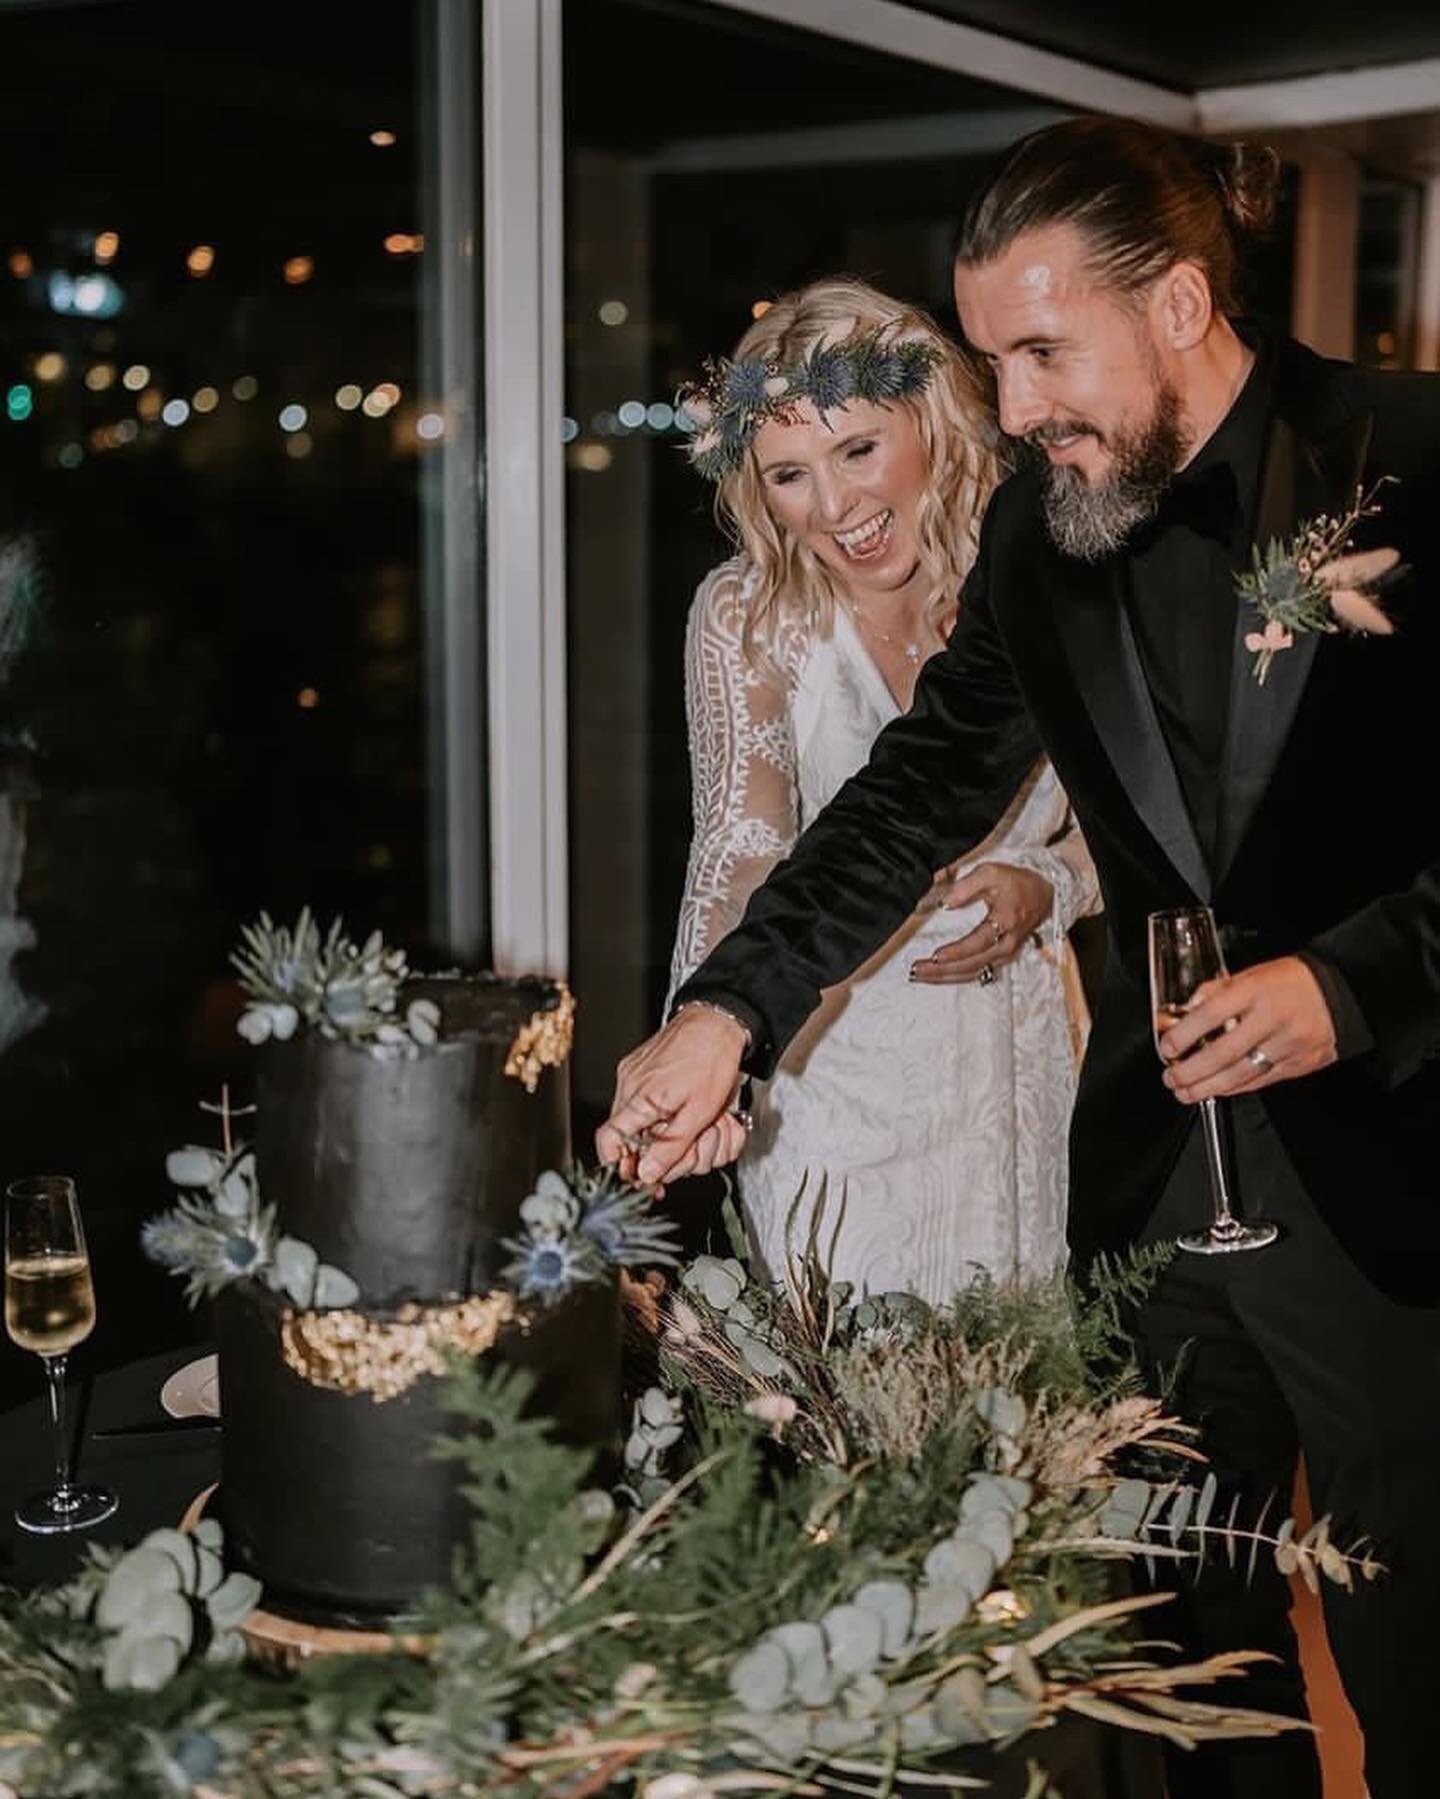 🥂Here&rsquo;s to @lololongstaff and Craig and their gothic cake of dreams ☠️🖤
.
.
📸 @martailardo_photos